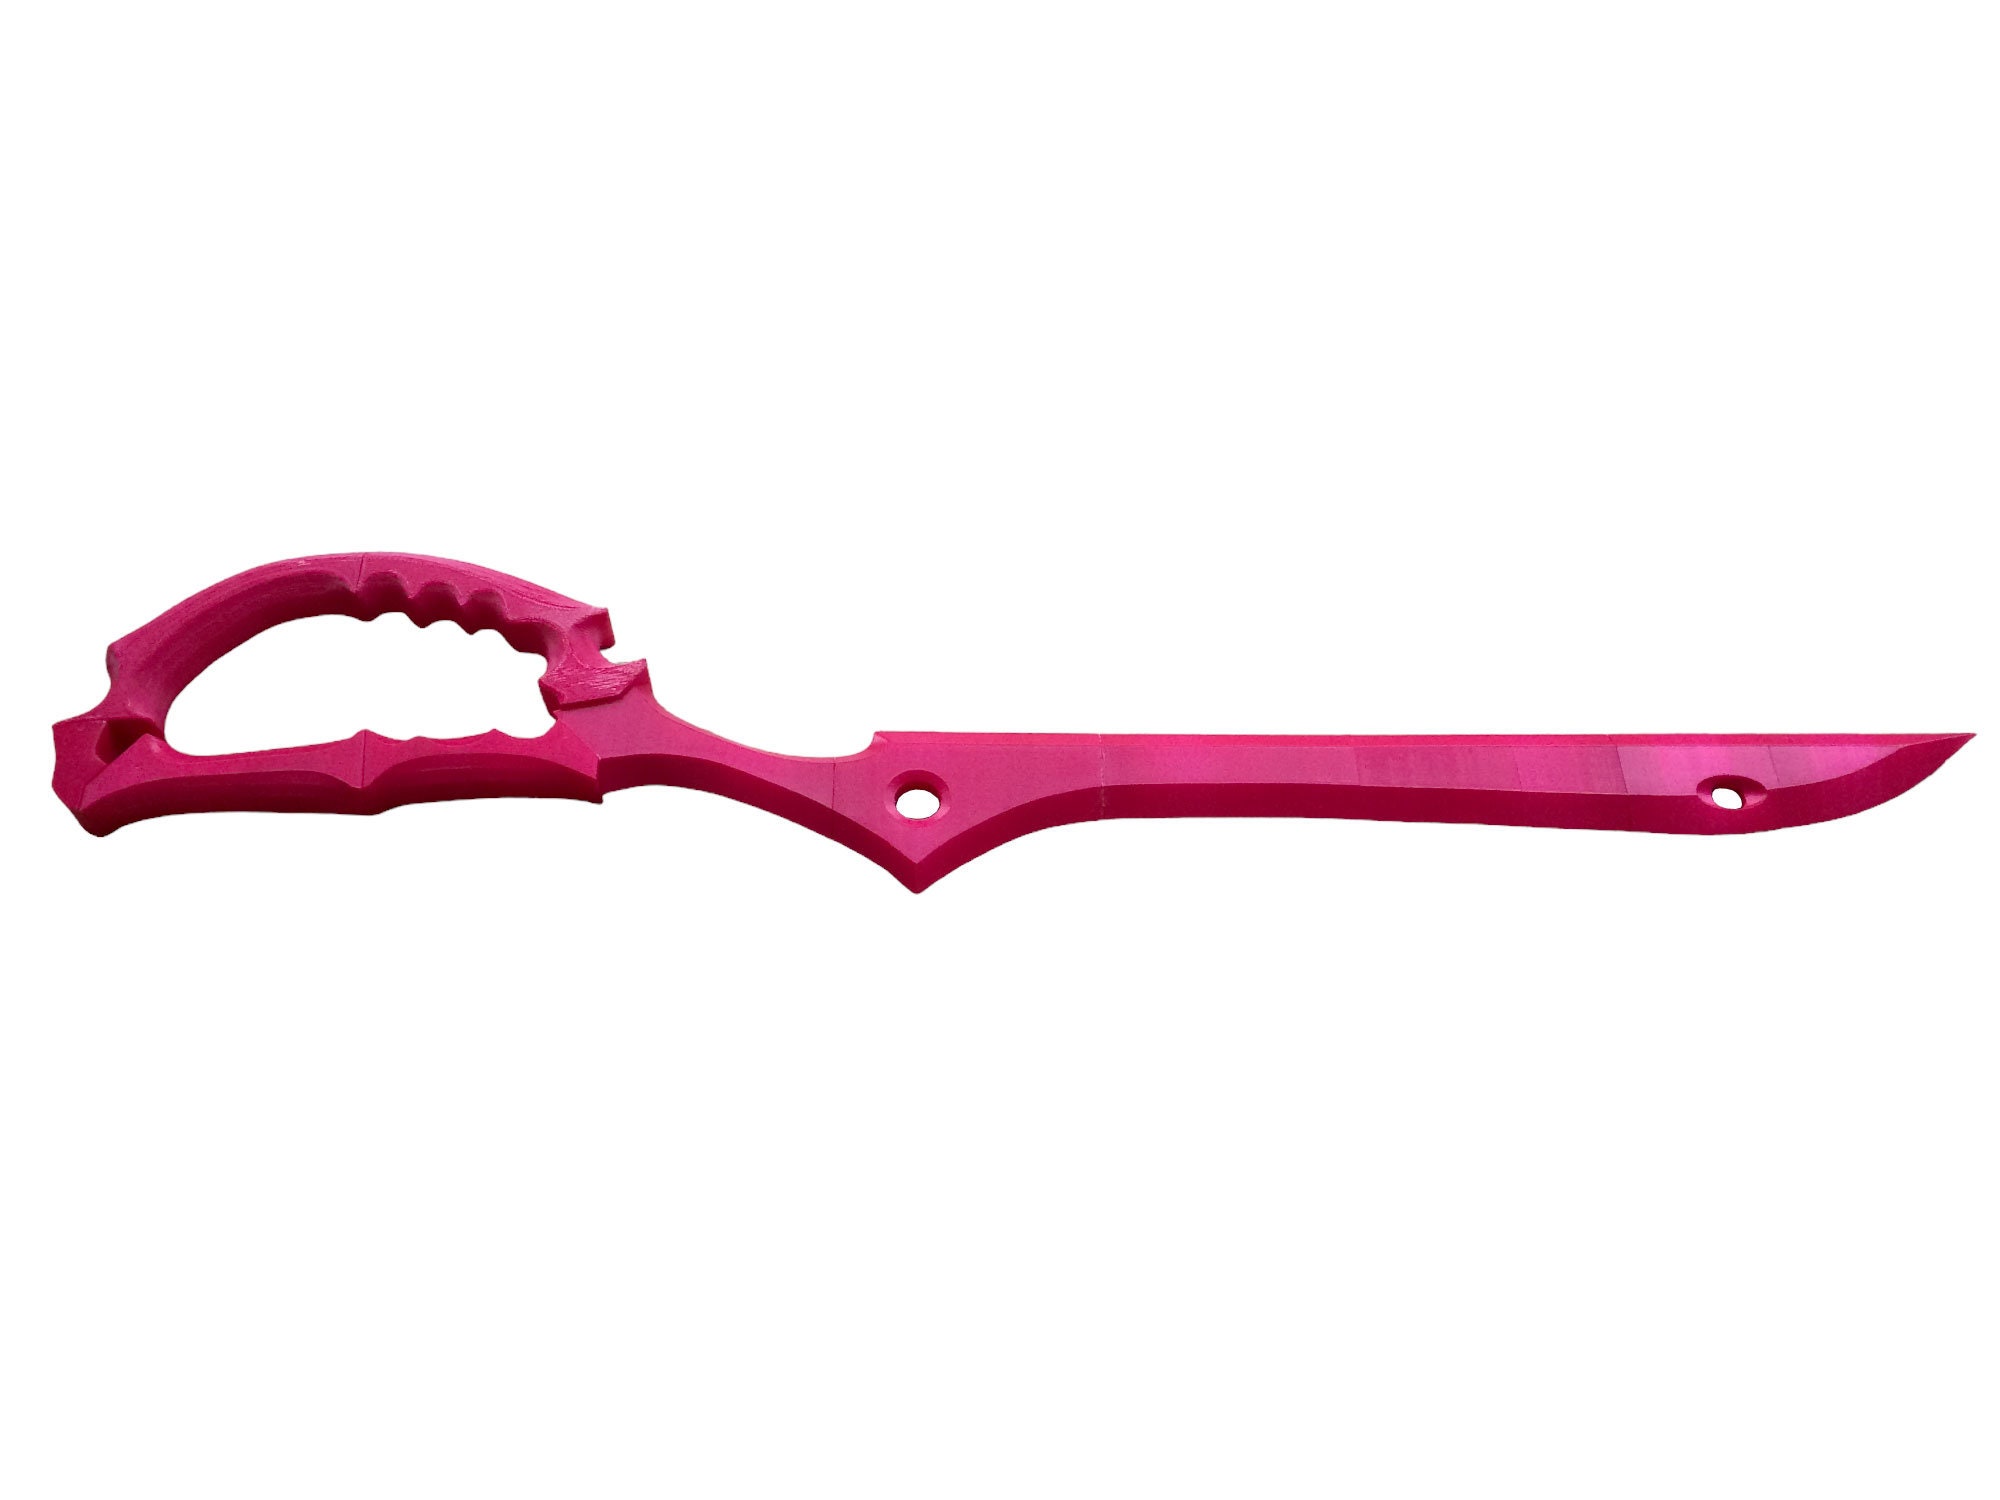 Pink Power HG2043 Electric Scissors - Cardboard and Metal Replacement Blade  Lithium Ion - Cardboard Scissors (PPD Blade) 